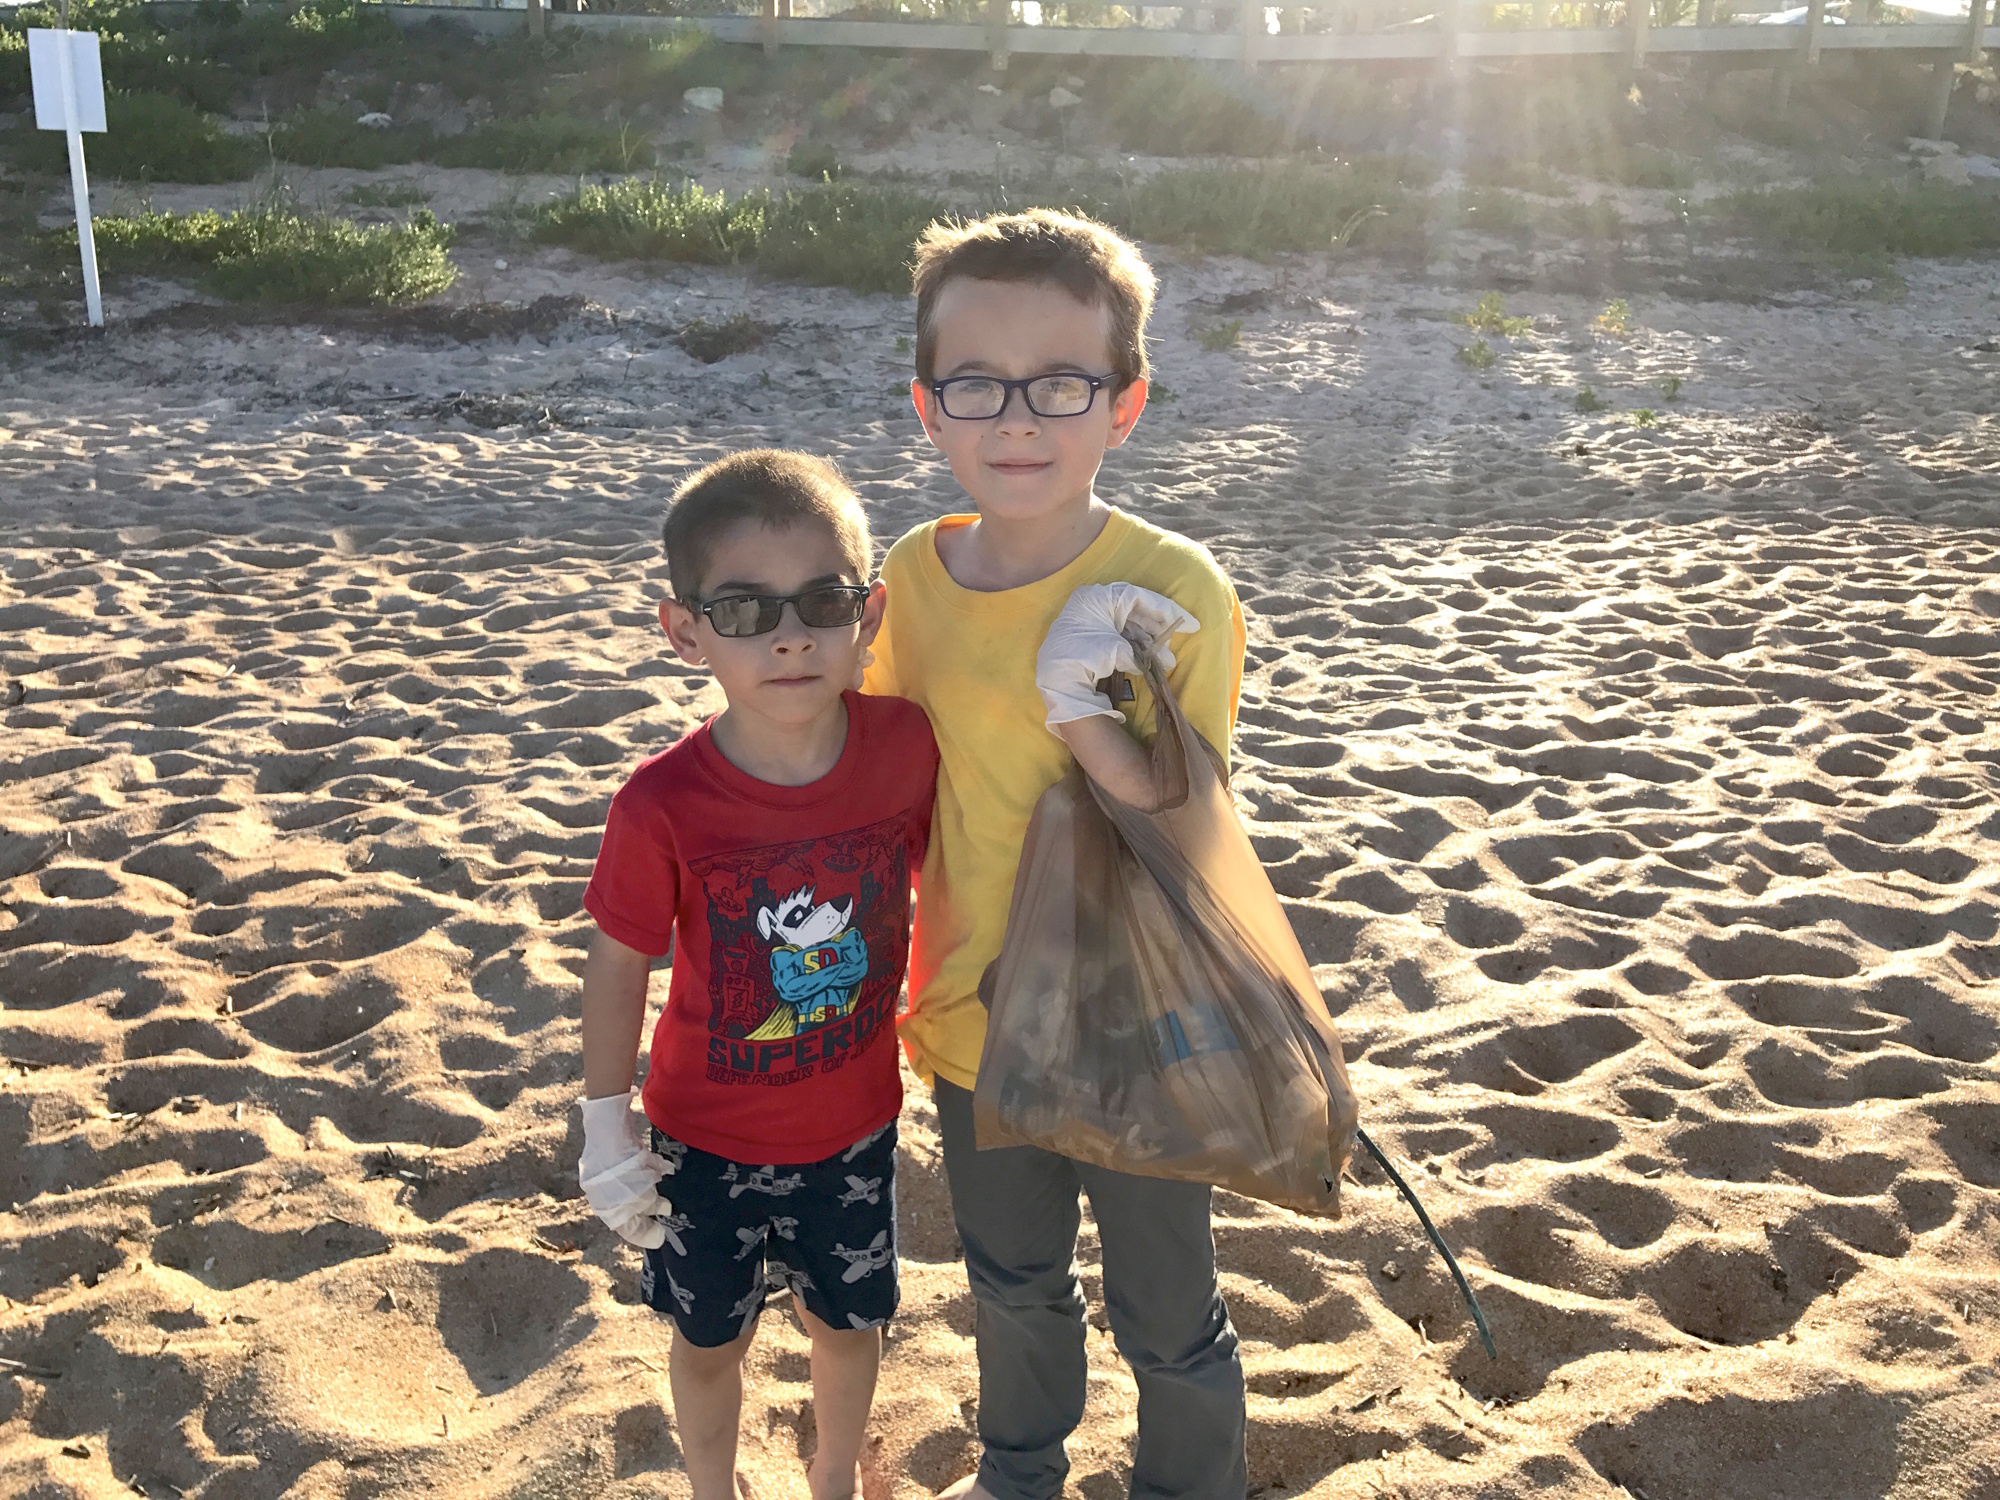 Ivan Cheban and Nikita Boychev helped with the beach cleanup efforts led by Old Kings Elementary School. Photo courtesy of Old Kings Elementary